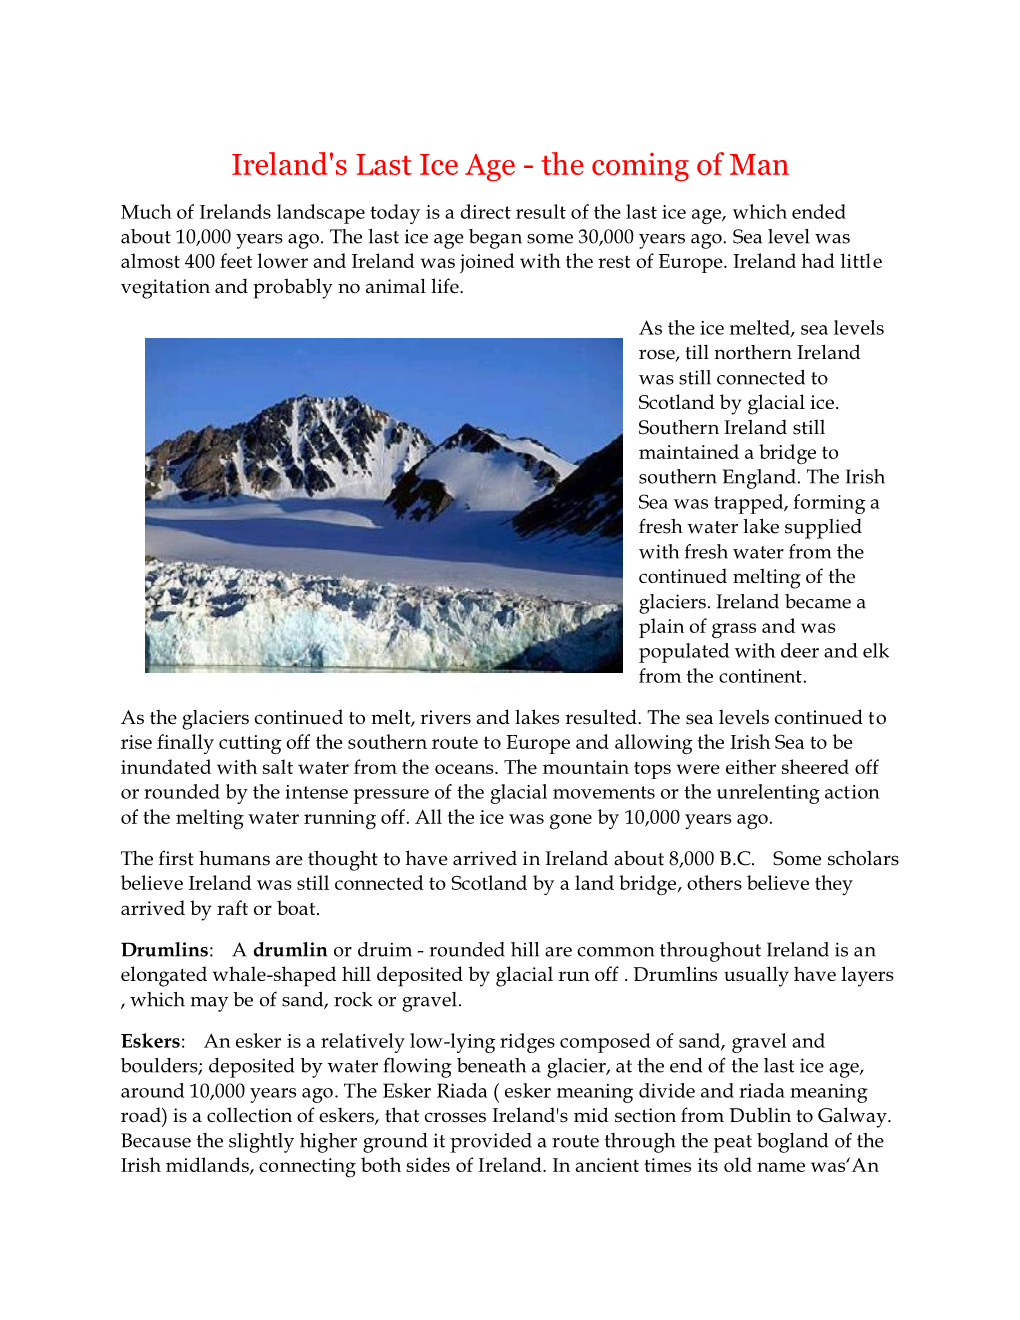 Ireland's Last Ice Age - the Coming of Man